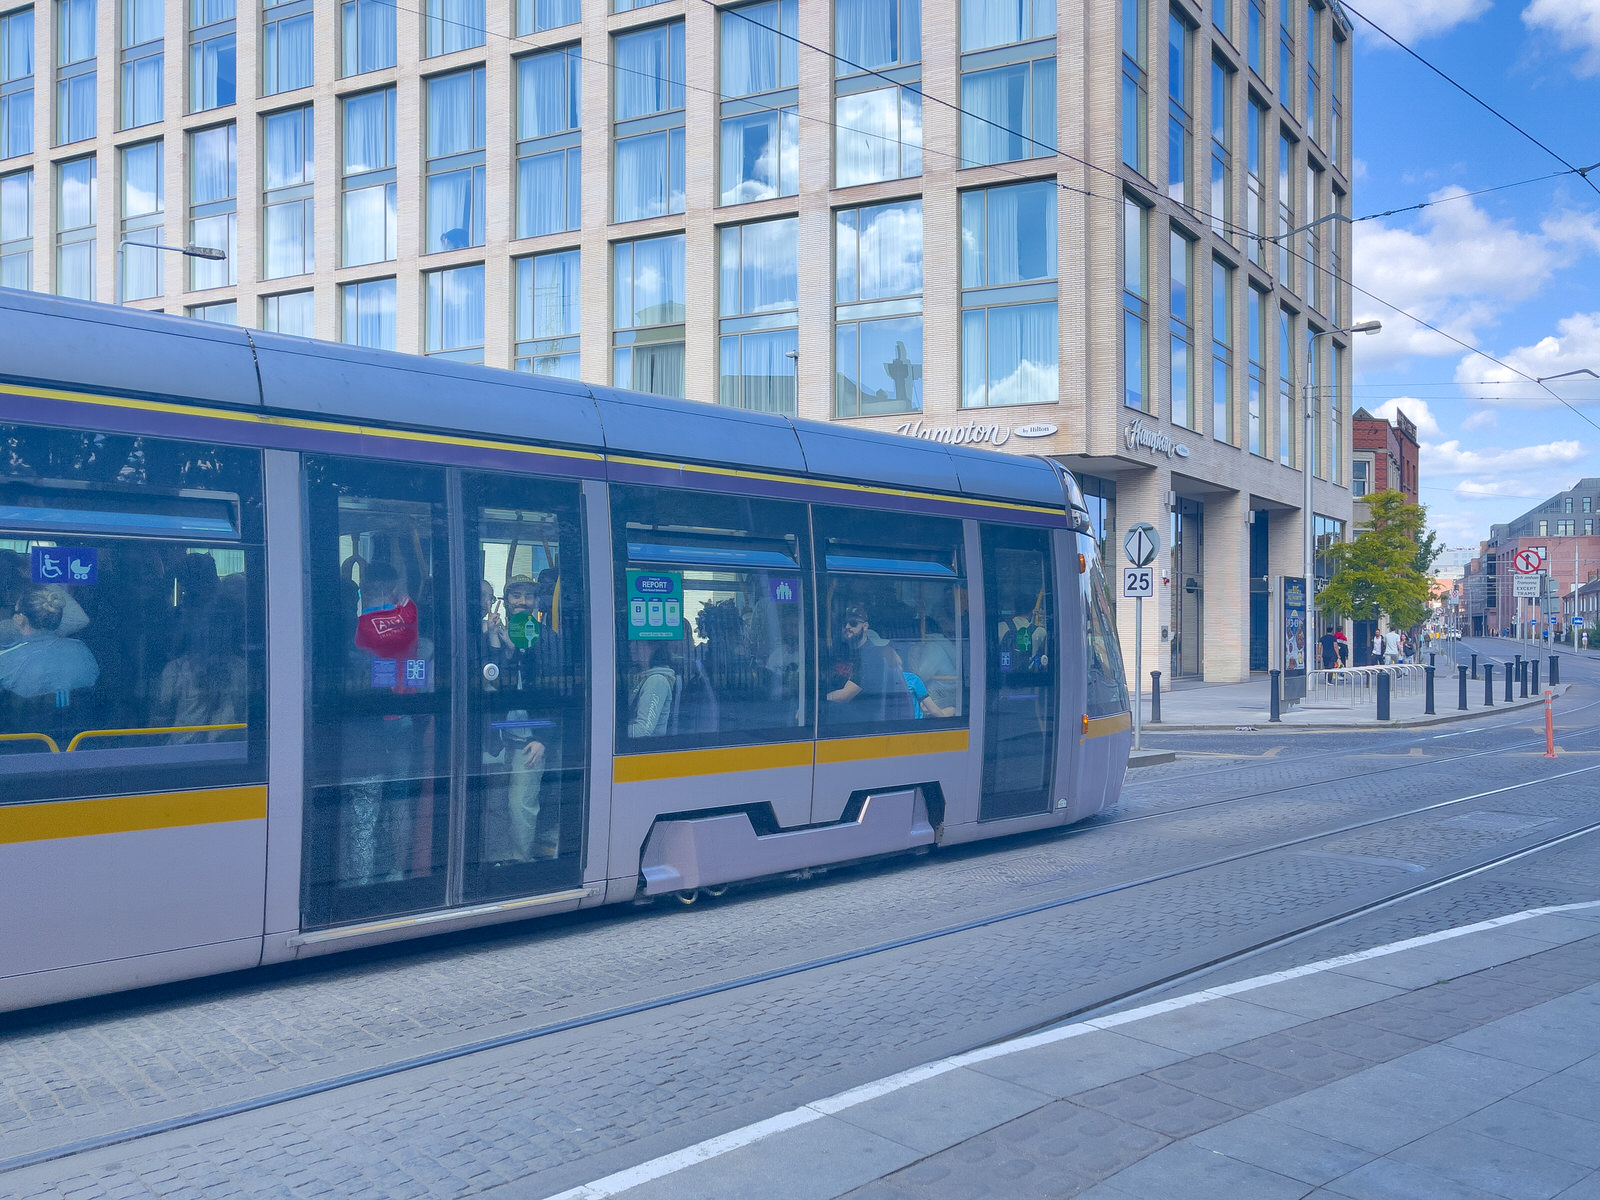 FOUR COURTS TRAM STOP